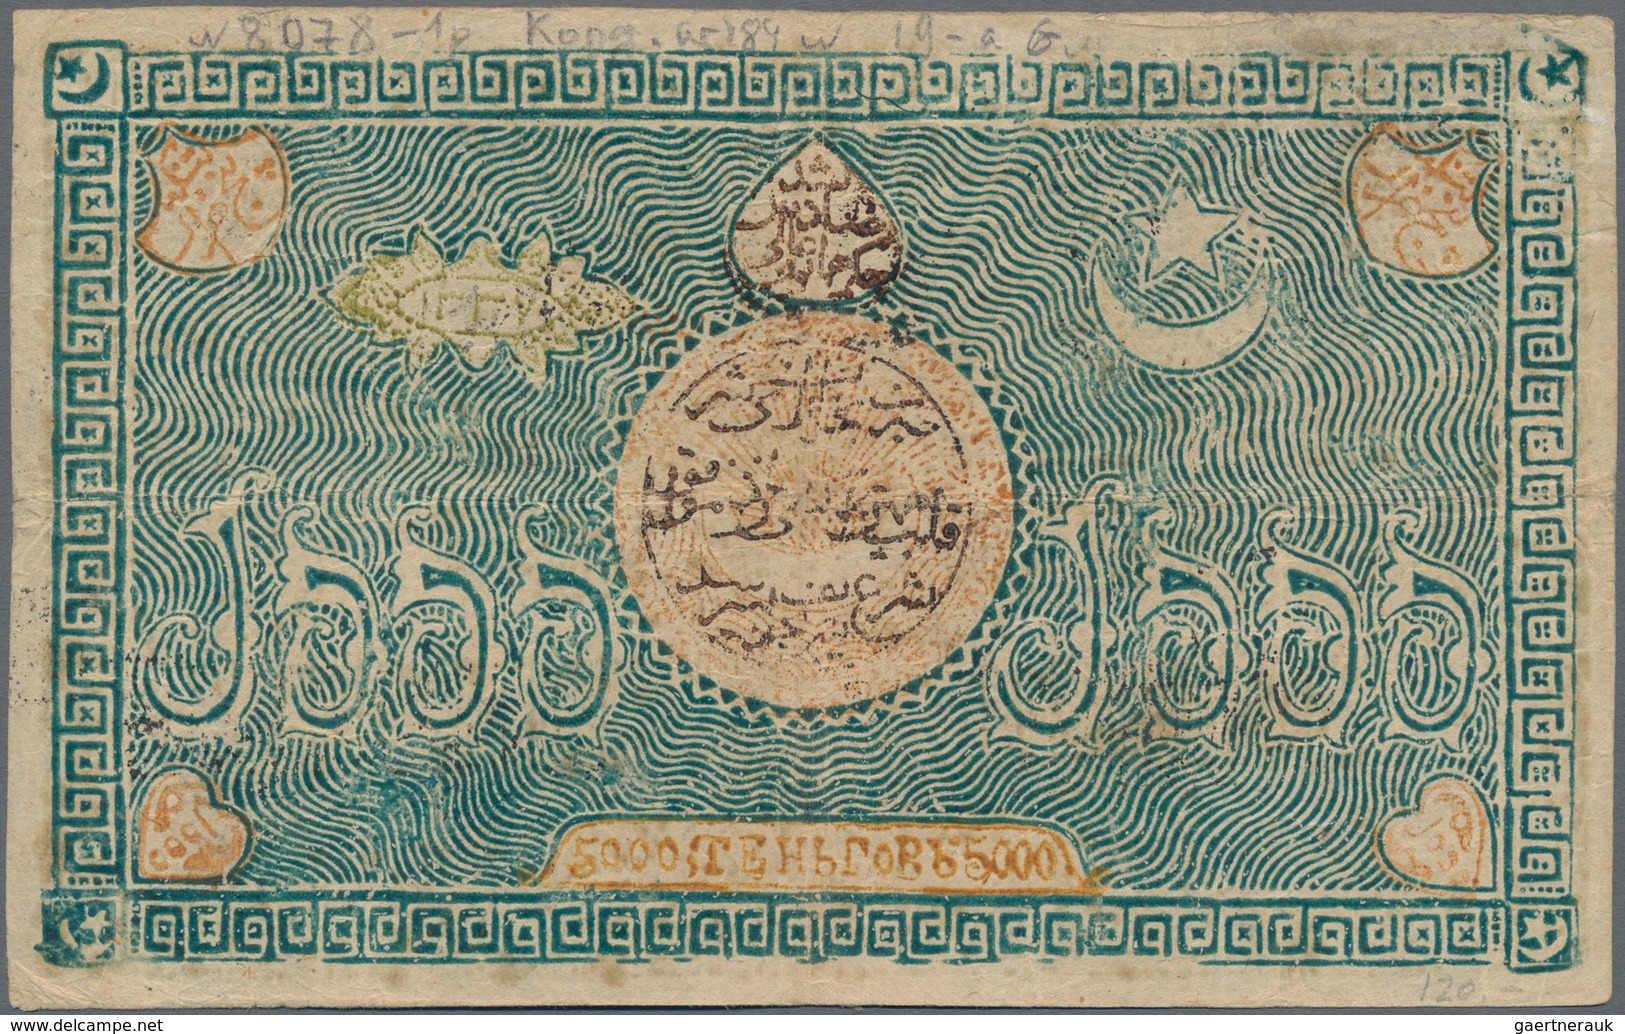 Russia / Russland: Central Asia - Bukhara Soviet Peoples Republic 5000 Tengas AH1338 (1920), P.S1033 - Russia